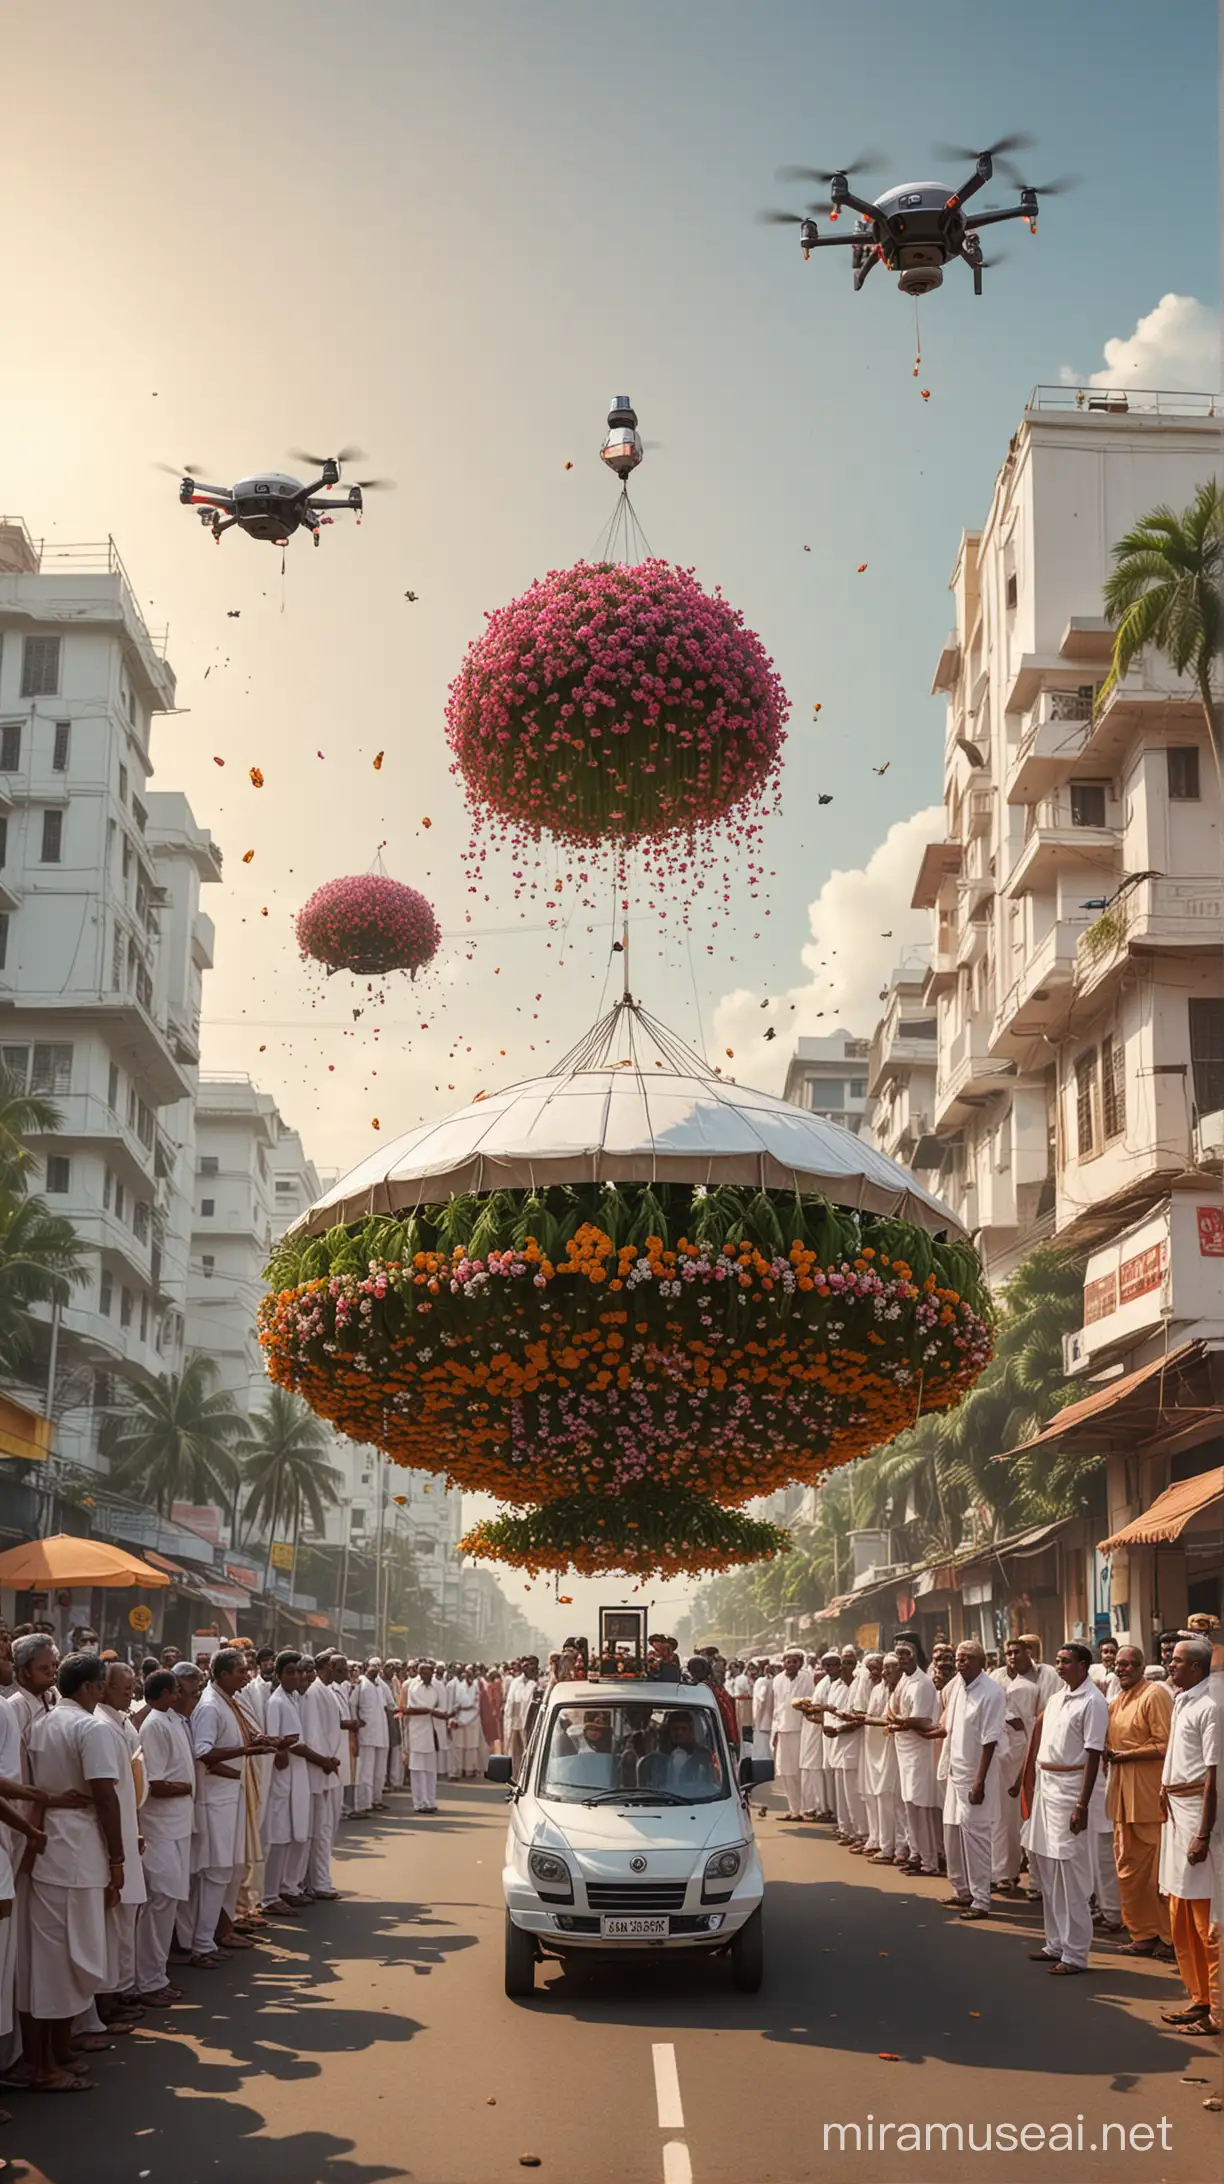 a rule of third illustration of a futuristic mobile food  pod not flying with kerala building behind and autorikshaw drivers and autos infront with drones delivering food on the ground and hindu priests throwing flowers on the ground to the devotees from the sky in an hoverboard and holograms in the sky in low angle ant view  dynamic 3 point perspectuve low angle and the wholw swt up is kerala